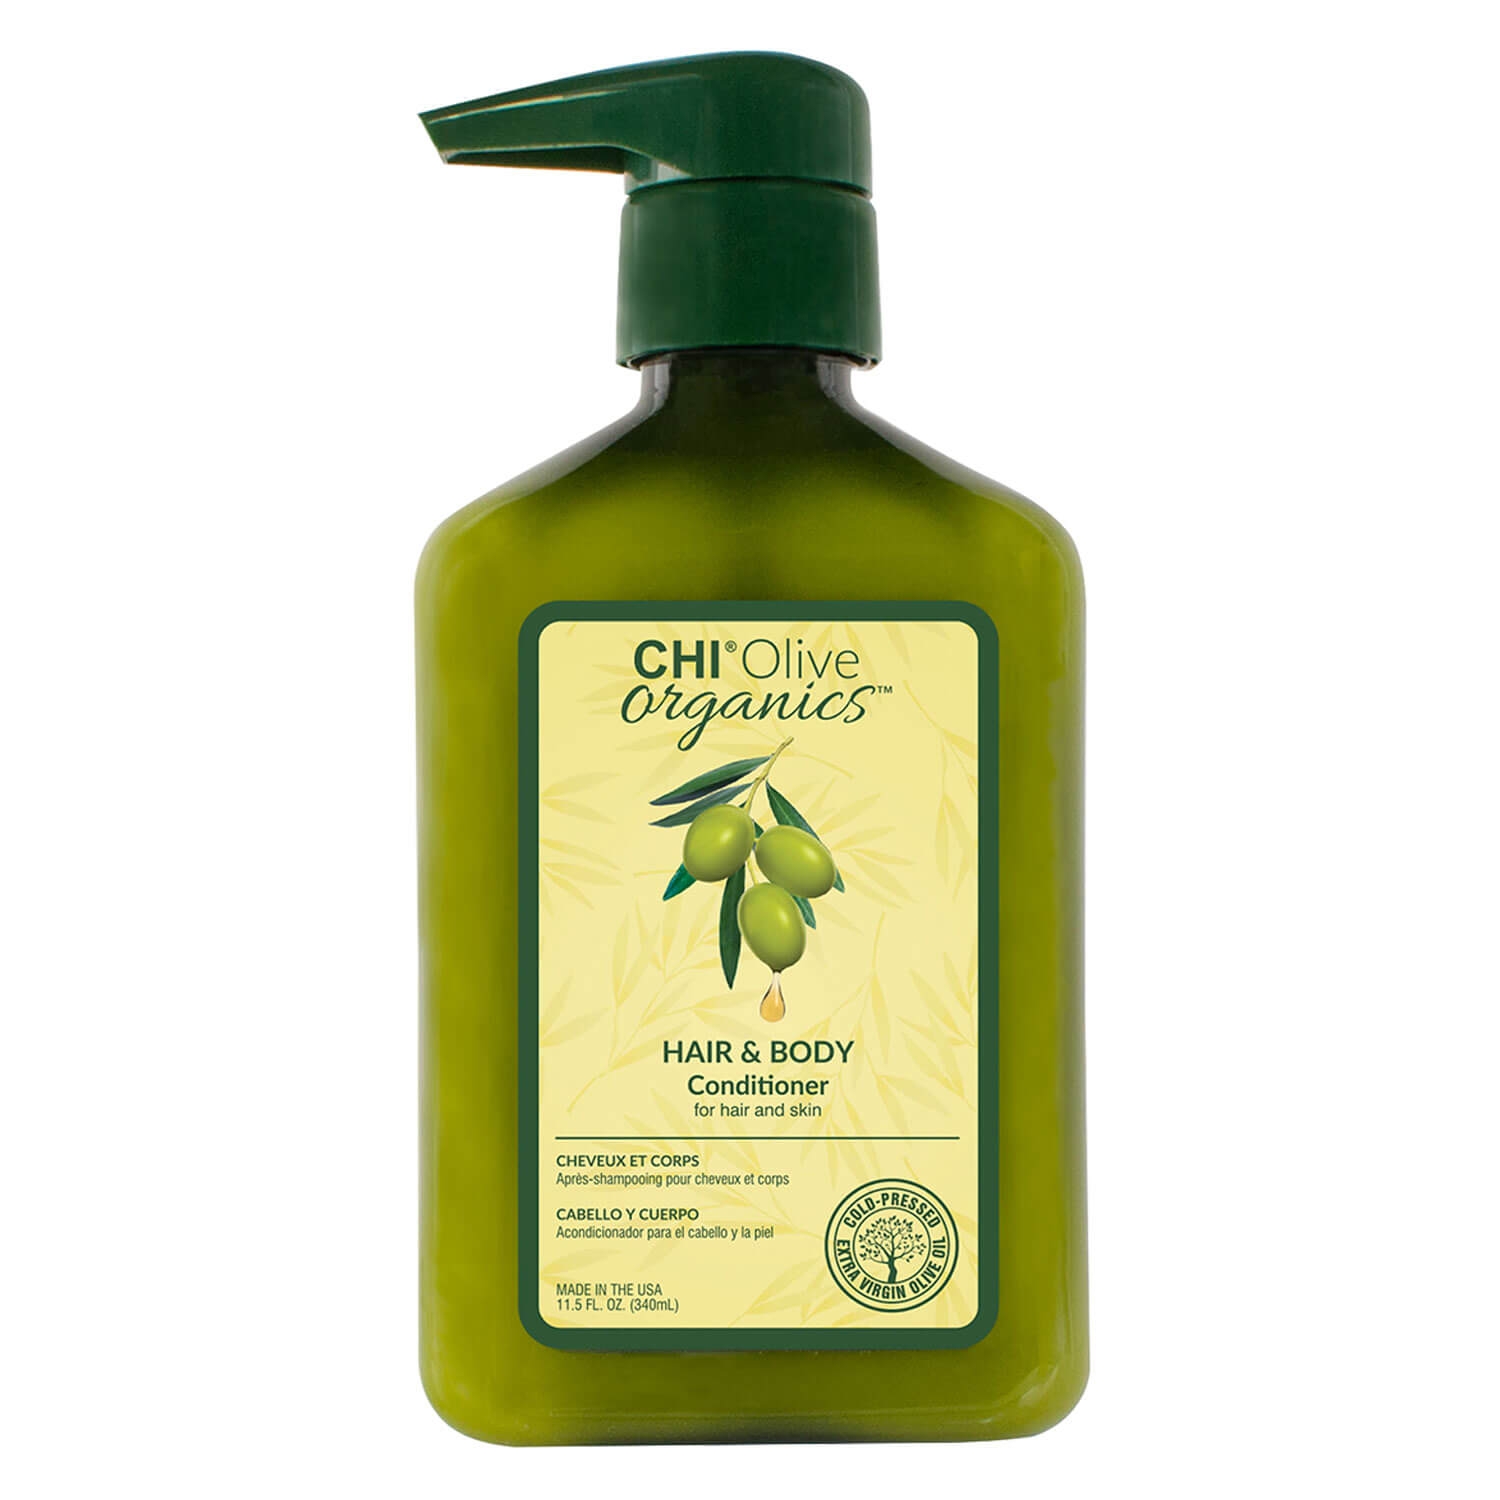 Product image from CHI Olive Organics - Hair & Body Conditioner